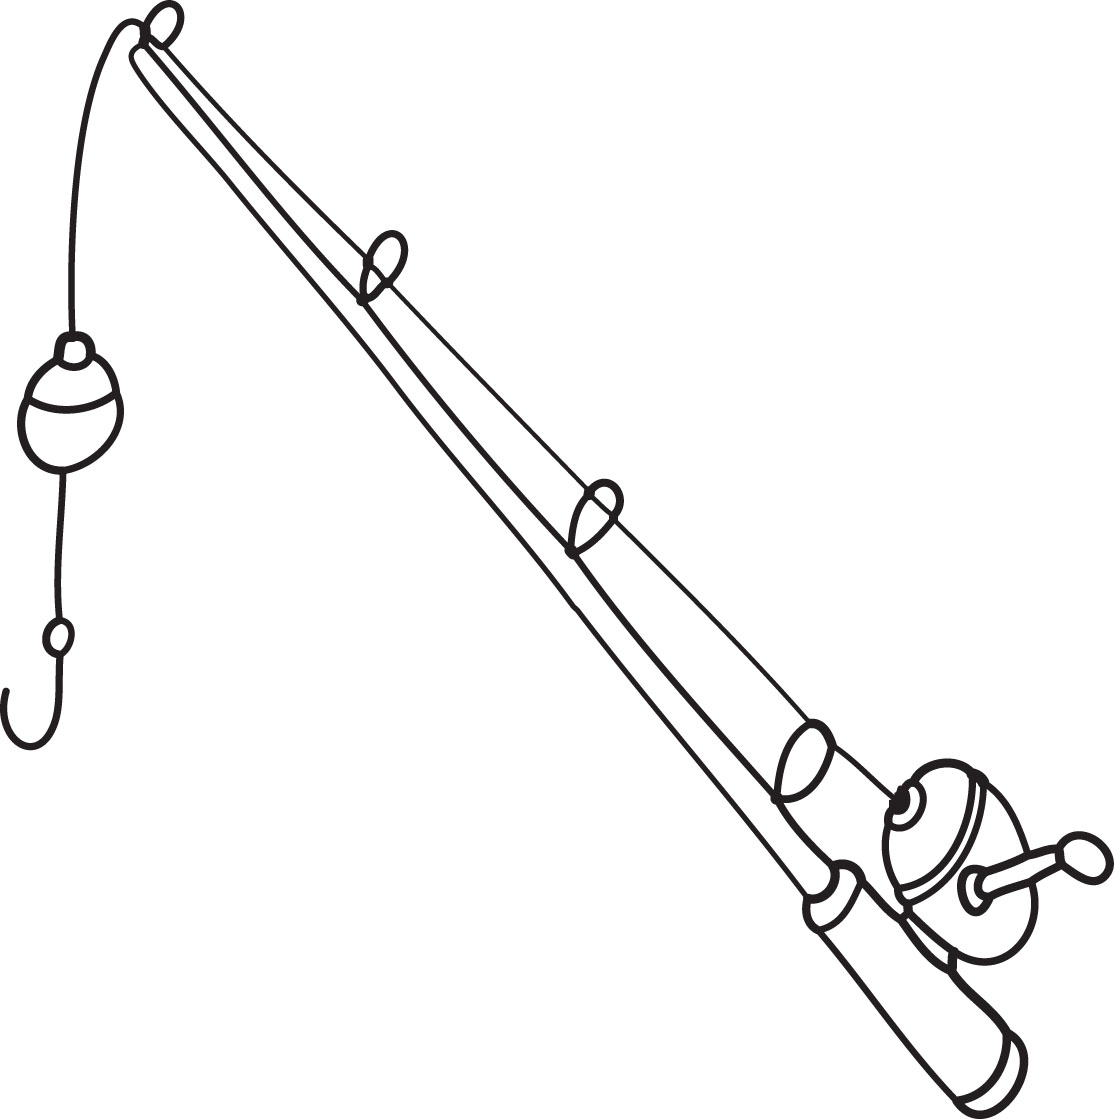 Free Fishing Pole Clipart Black And White Download Free Fishing Pole